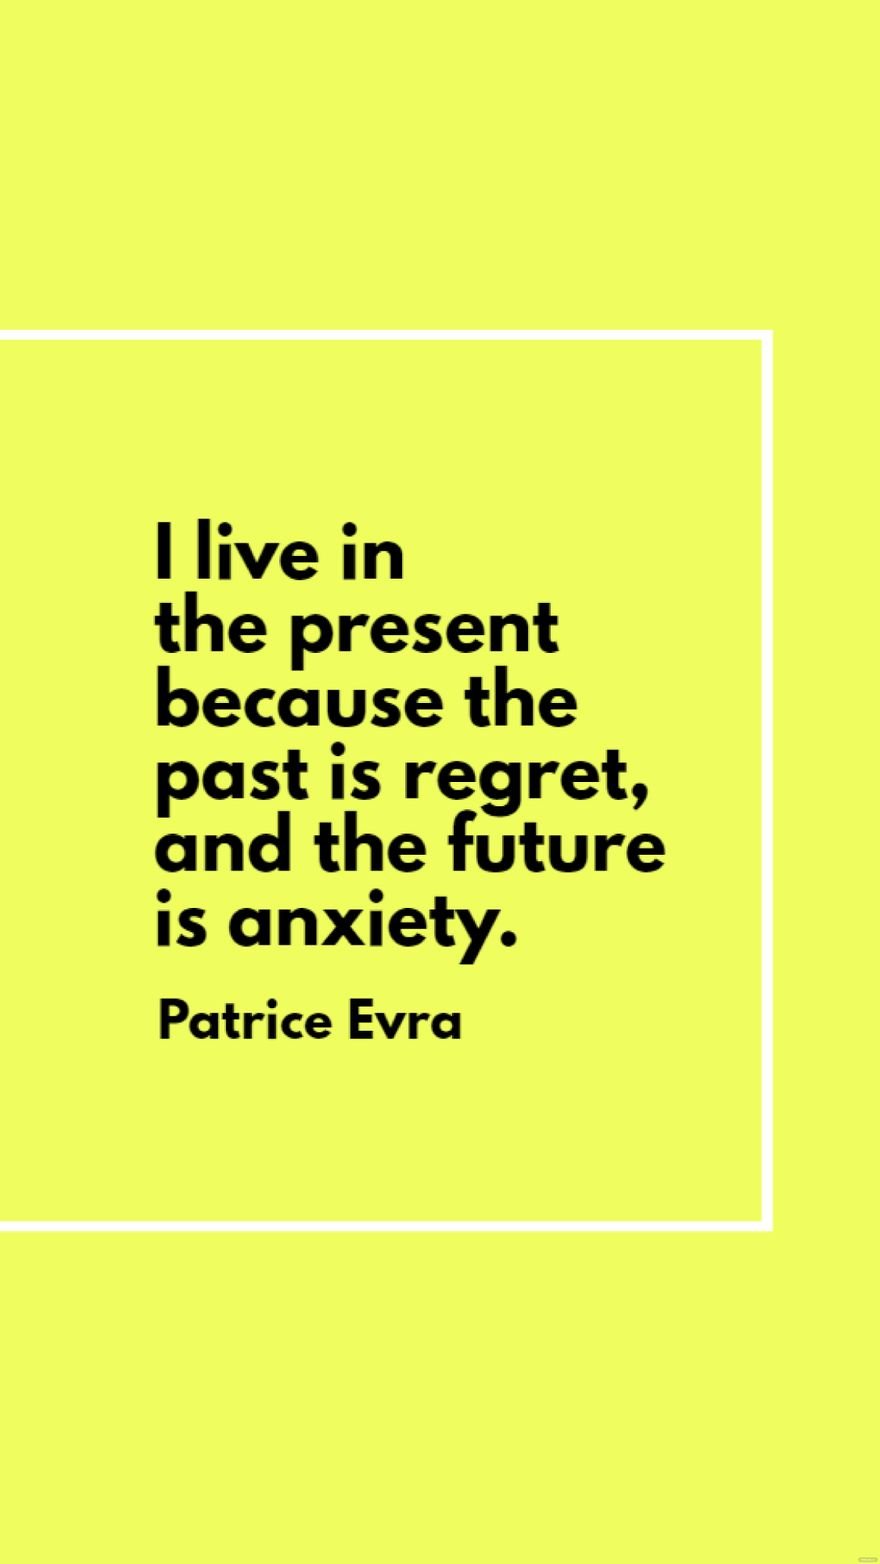 Patrice Evra - I live in the present because the past is regret, and the future is anxiety.